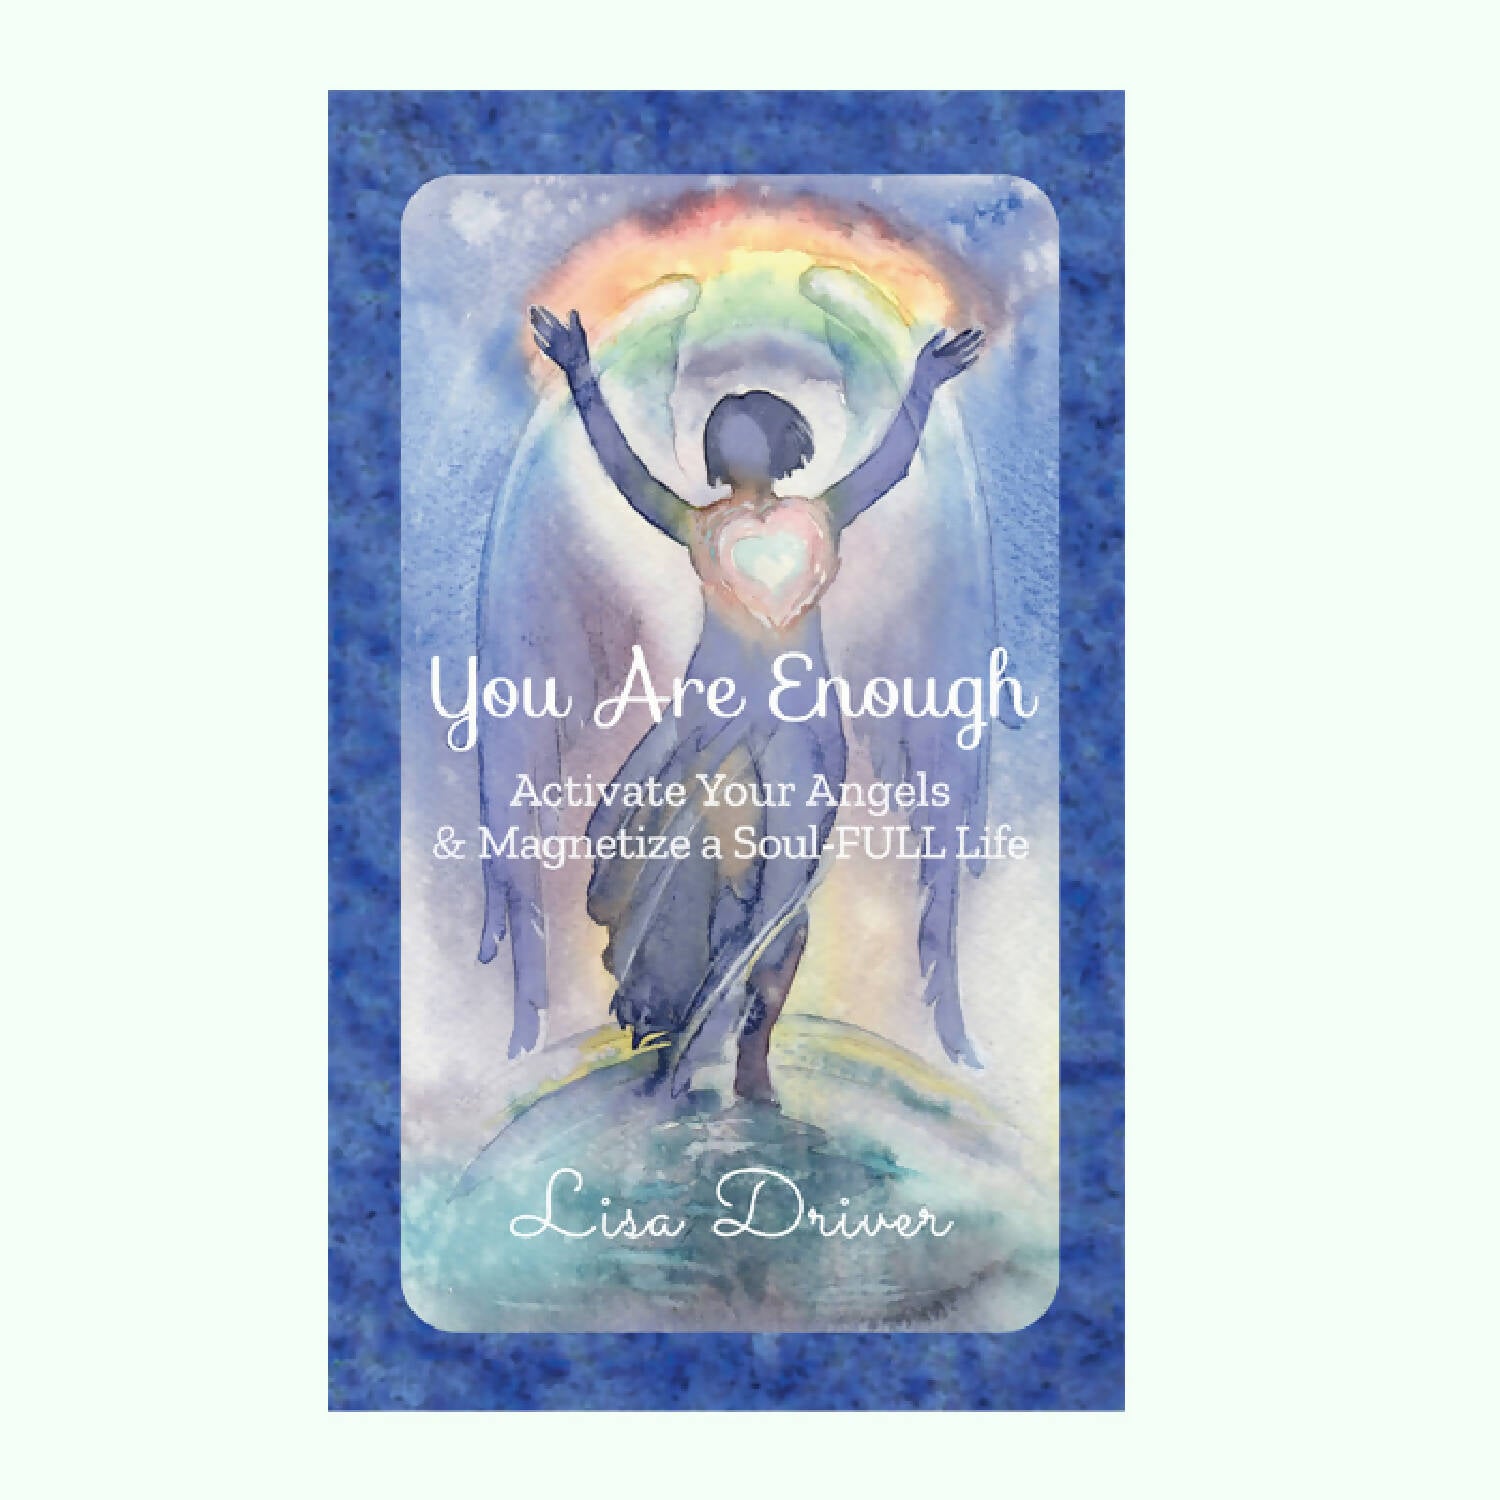 You Are Enough - spiritual guidebook #4 by Lisa Driver